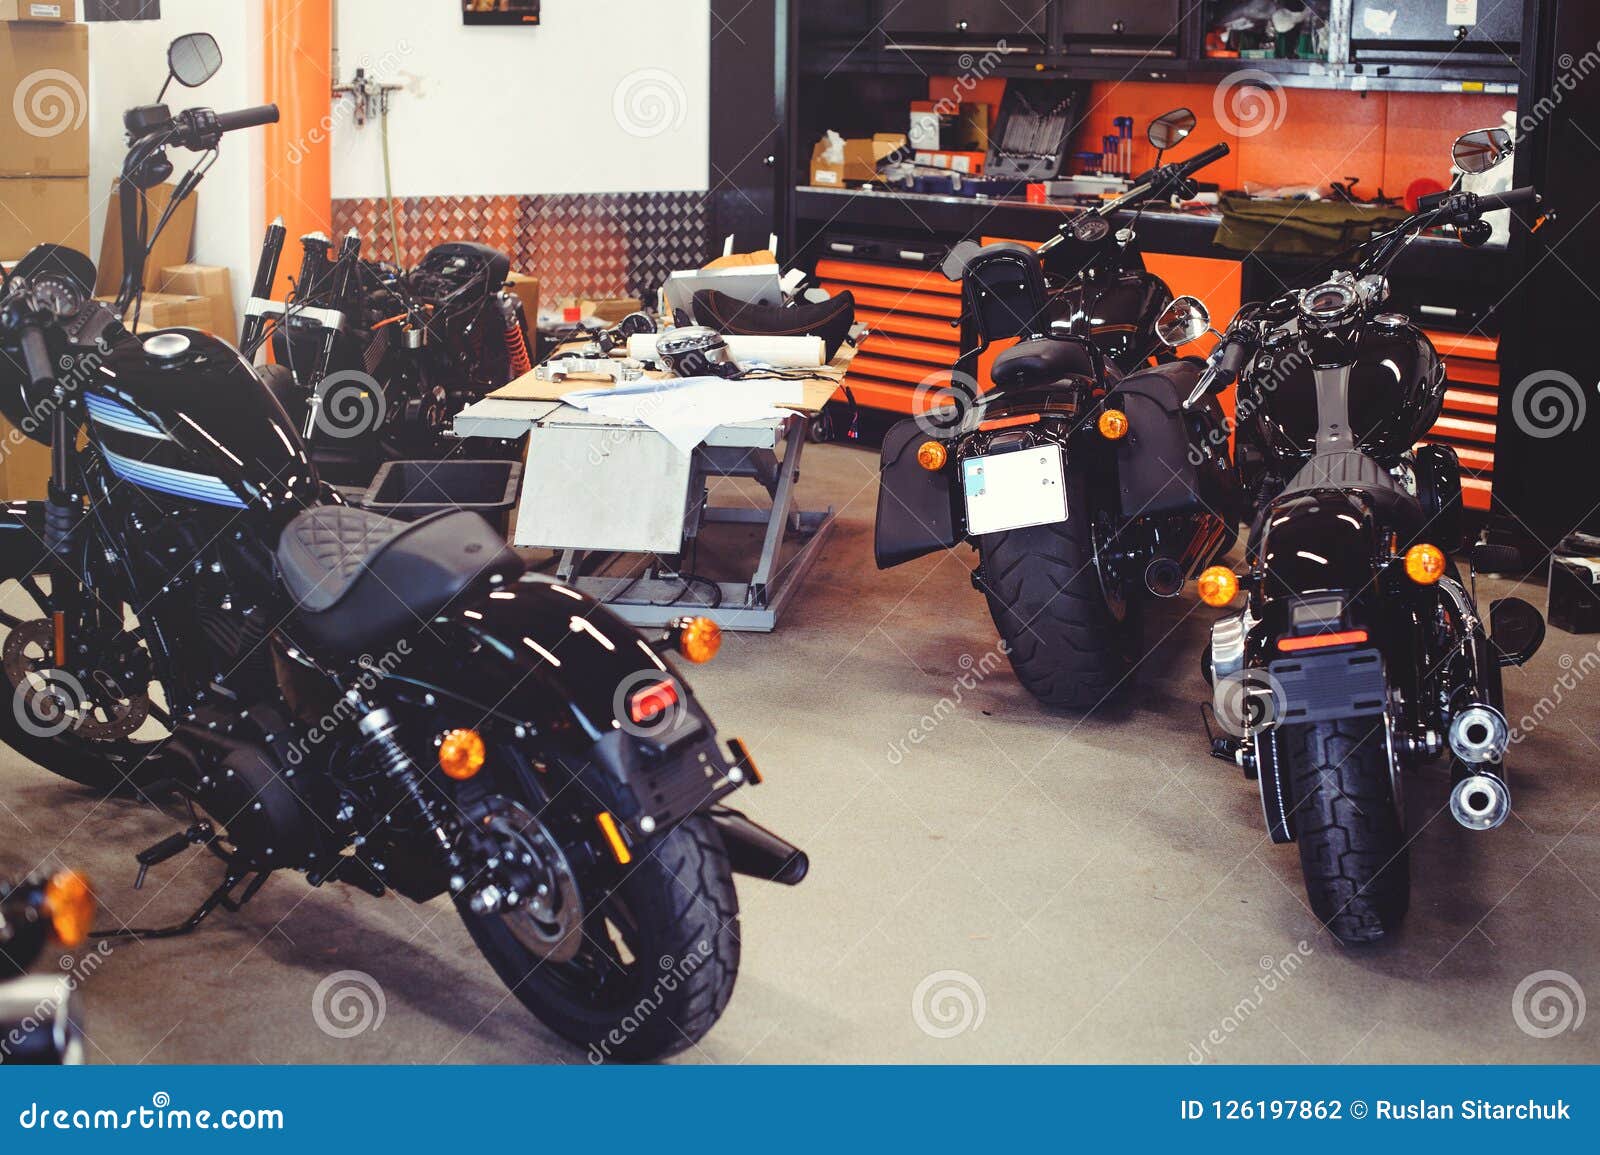 Many Motorcycles On The Floor With Workshop Tools A Modern Garage